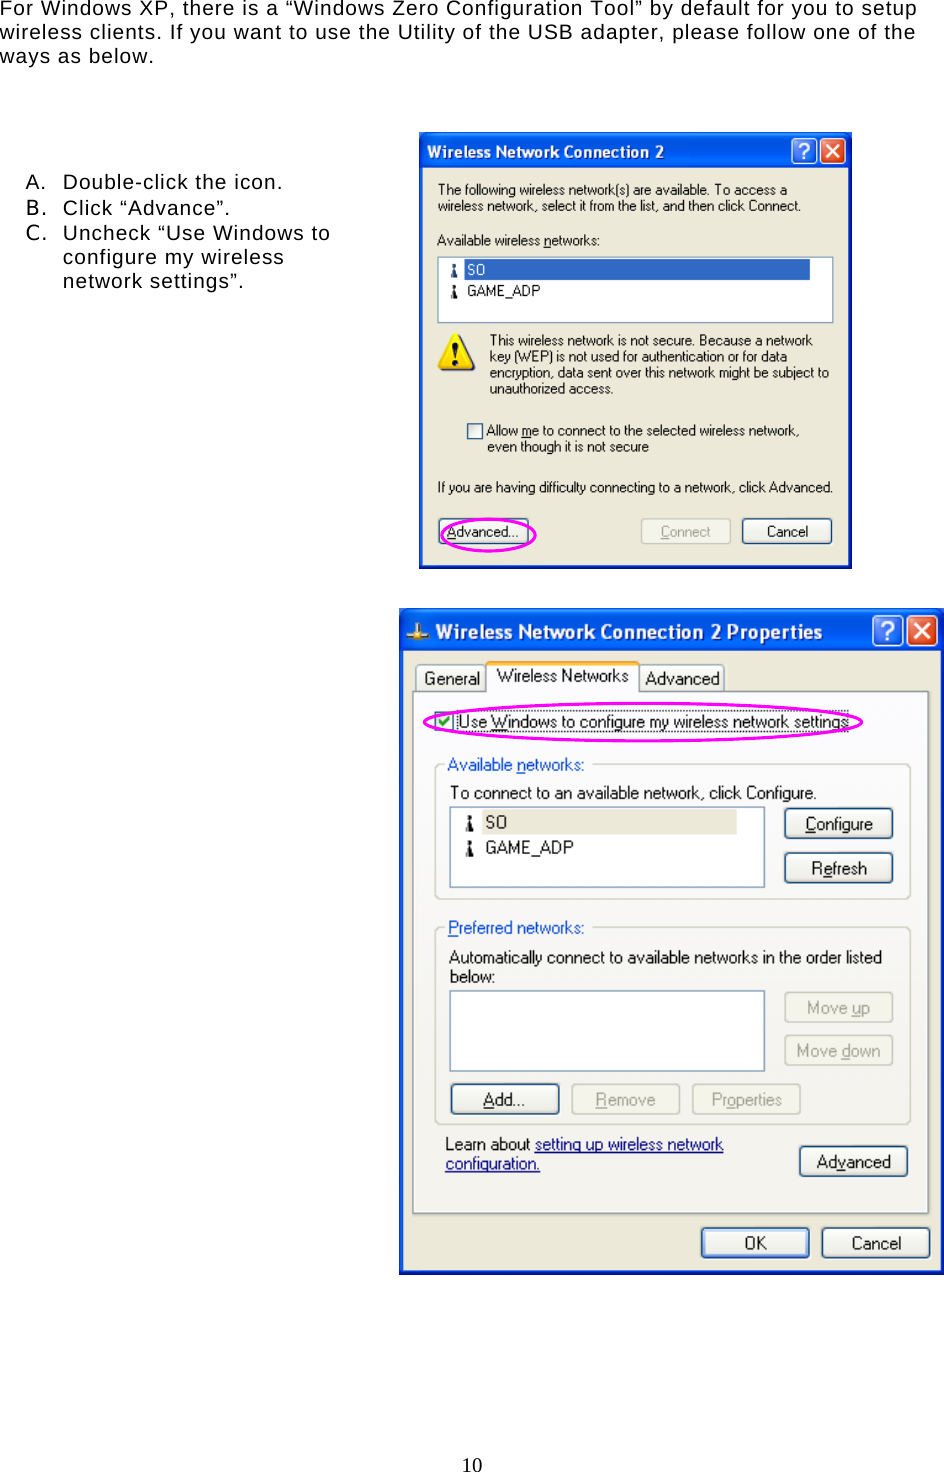  10   For Windows XP, there is a “Windows Zero Configuration Tool” by default for you to setup wireless clients. If you want to use the Utility of the USB adapter, please follow one of the ways as below.           A.  Double-click the icon. B.  Click “Advance”. C.  Uncheck “Use Windows to configure my wireless network settings”. 